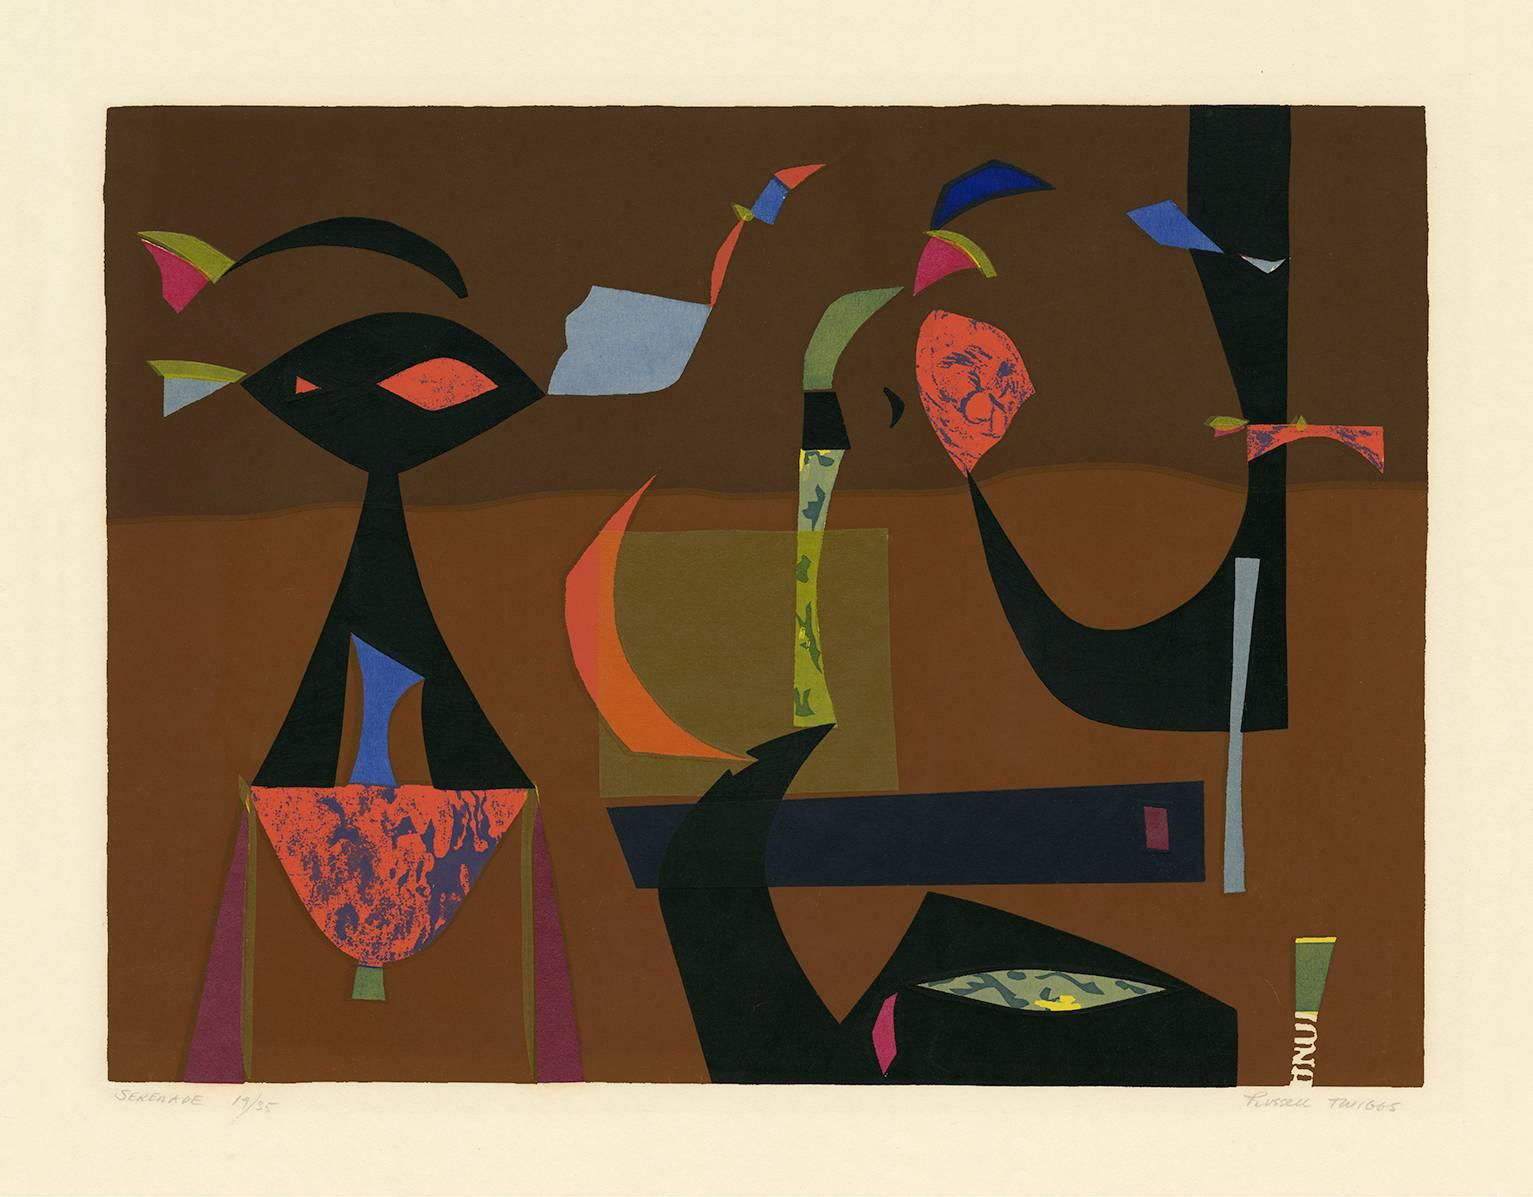 A dynamic and whimsical mid-century modernist serigraph, with rich, fresh colors. Signed titled and numbered 14/35 in pencil; the full sheet in excellent condition.  Scarce.
Painter, graphic artist and teacher Russell Twiggs began exhibiting his